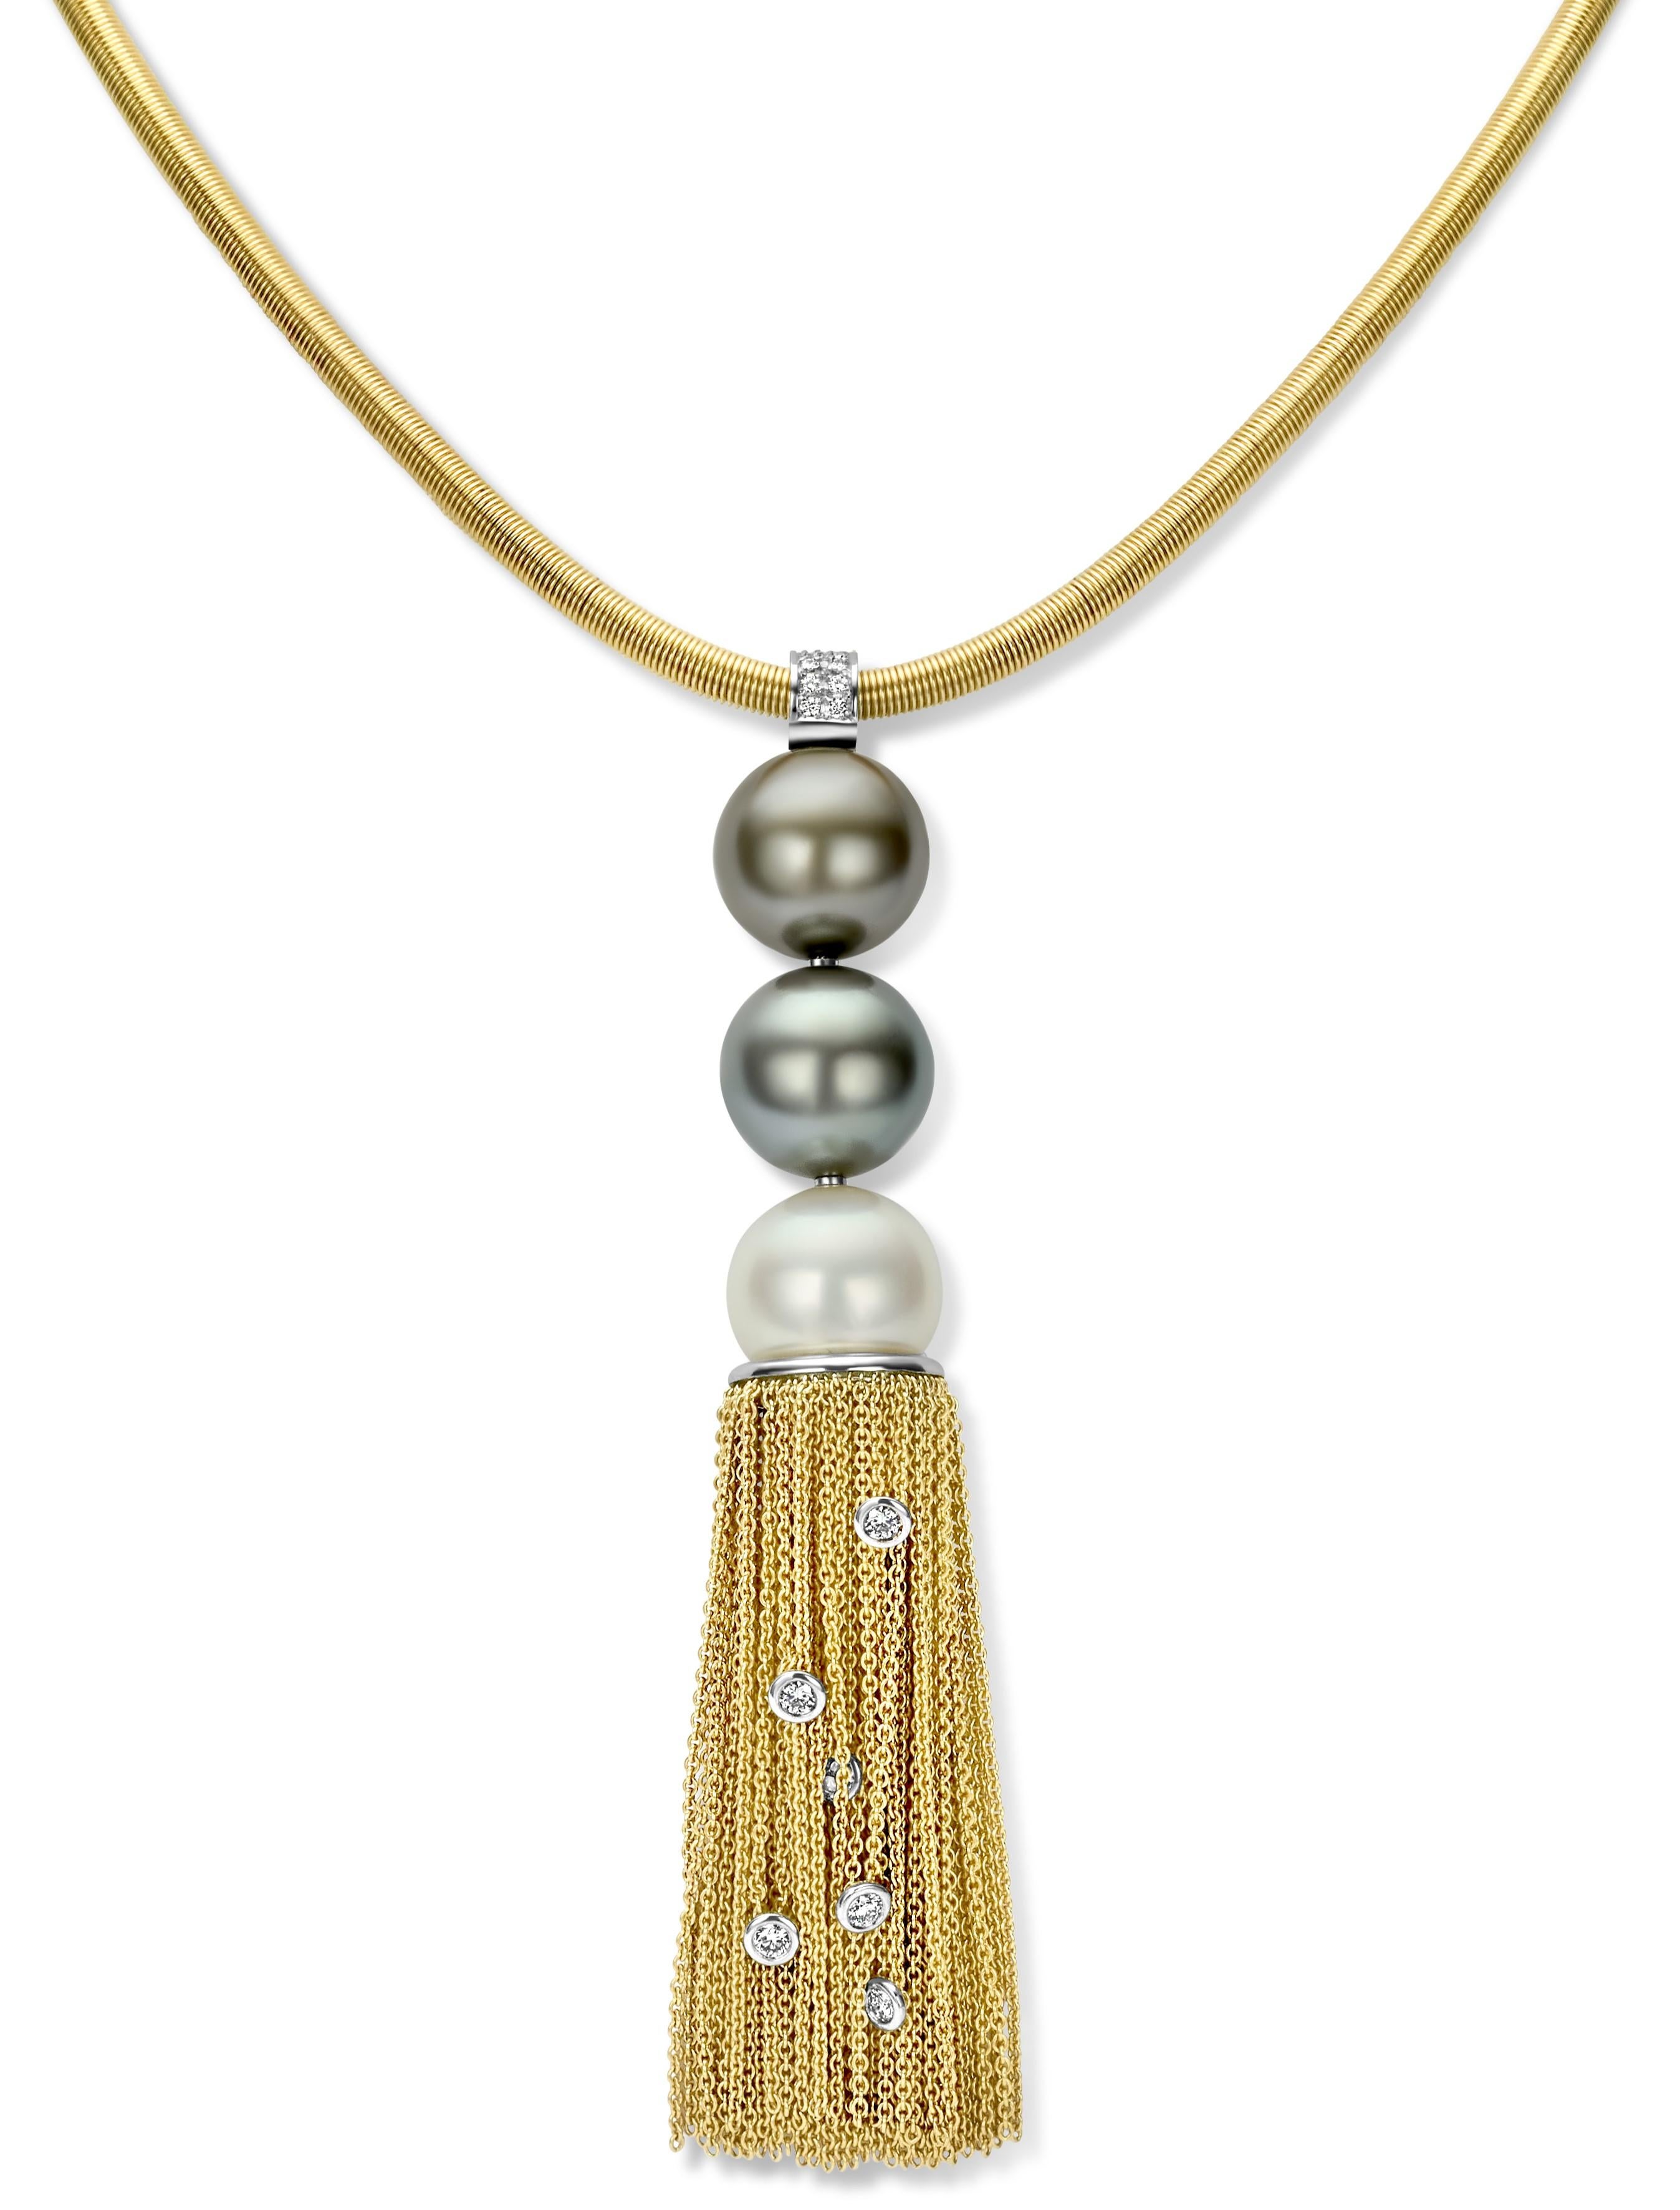 Pendant in Yellow Gold with 0.35 ct. Diamonds and Tahiti pearls and 1 South Sea Pearl, Floche attached. With Rat Tail Necklace

Material: Necklace 18 kt. yellow gold, Pendant 18 kt. white gold

Pearls: 3 pearls with a diameter of 13.8 mm

Diamonds: